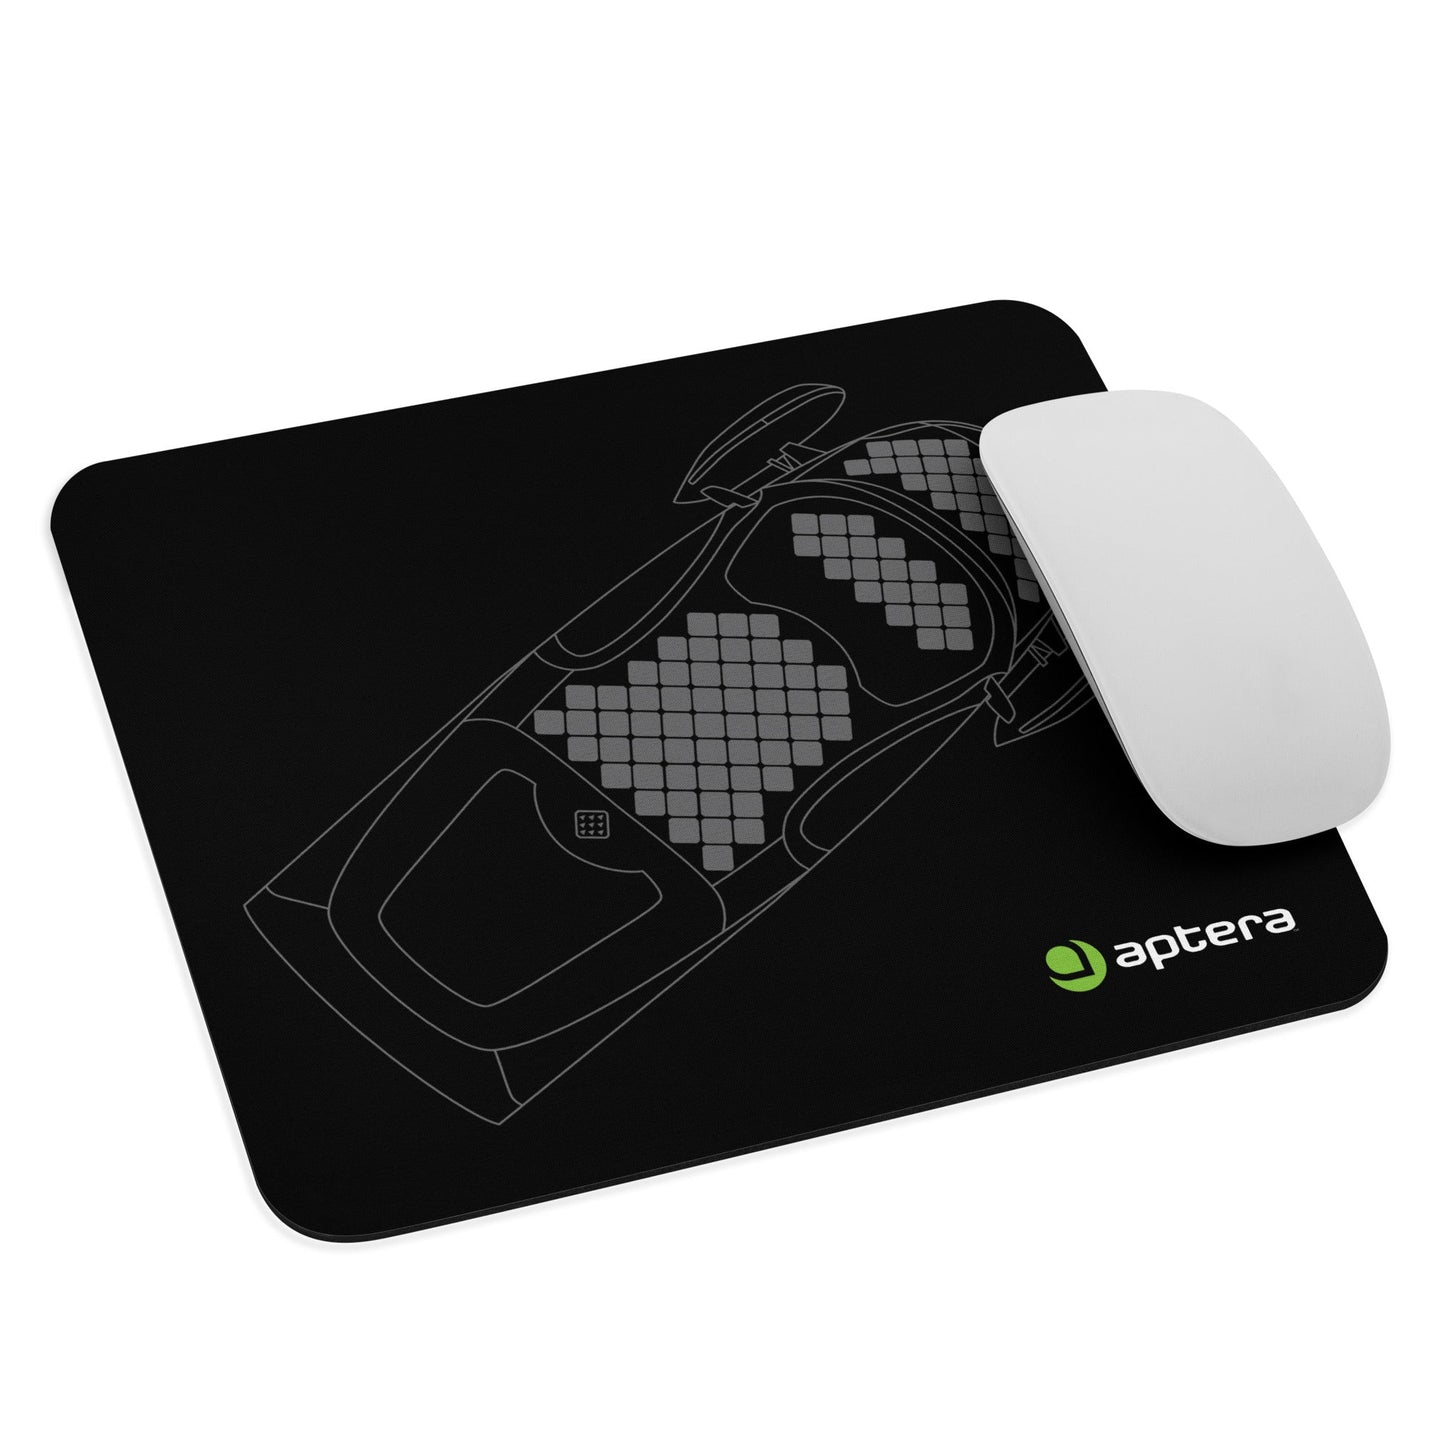 Top Down Solar Mouse Pad